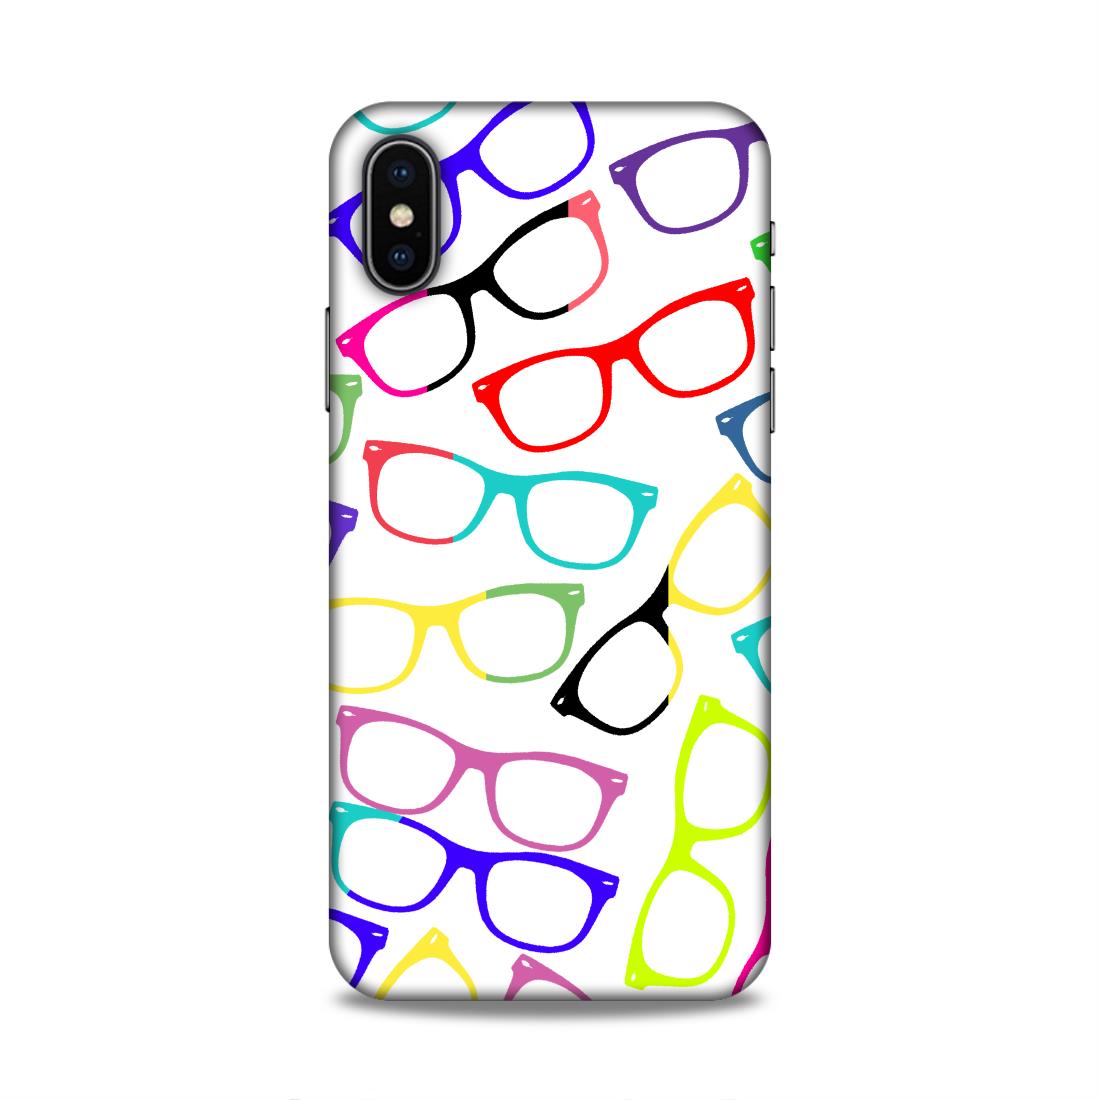 Spects Hard Back Case For Apple iPhone X/XS